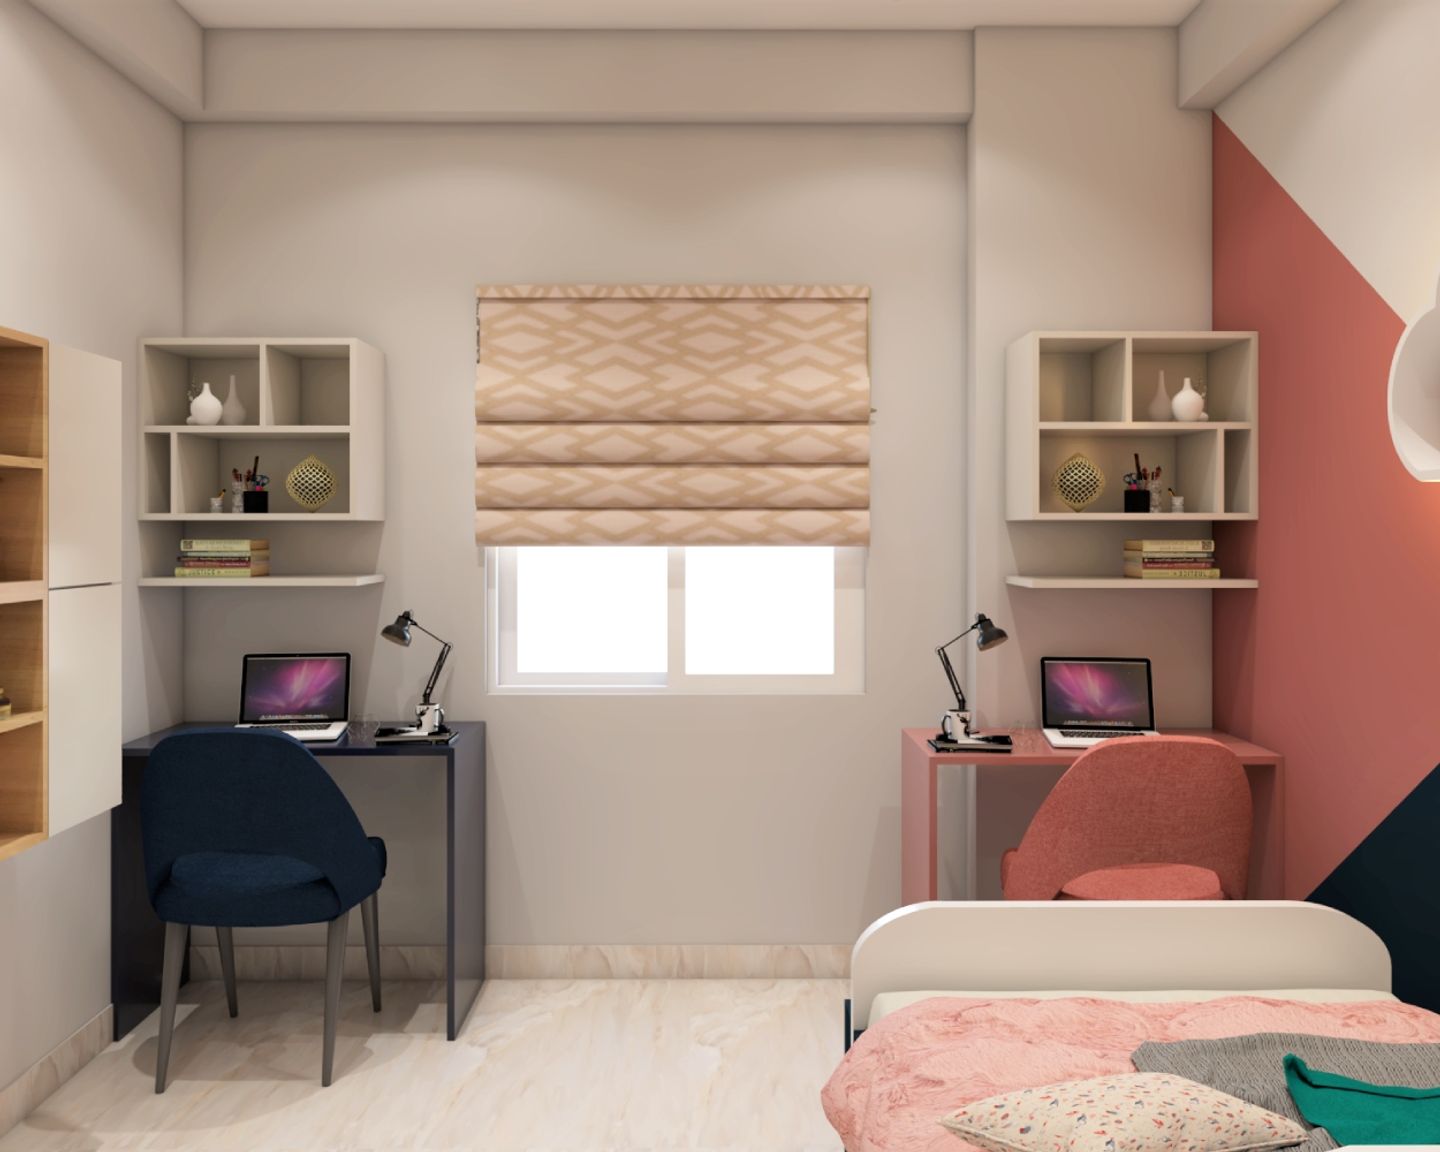 Modern Kids Room Design With Dual Study Tables And Tri-Toned Wall